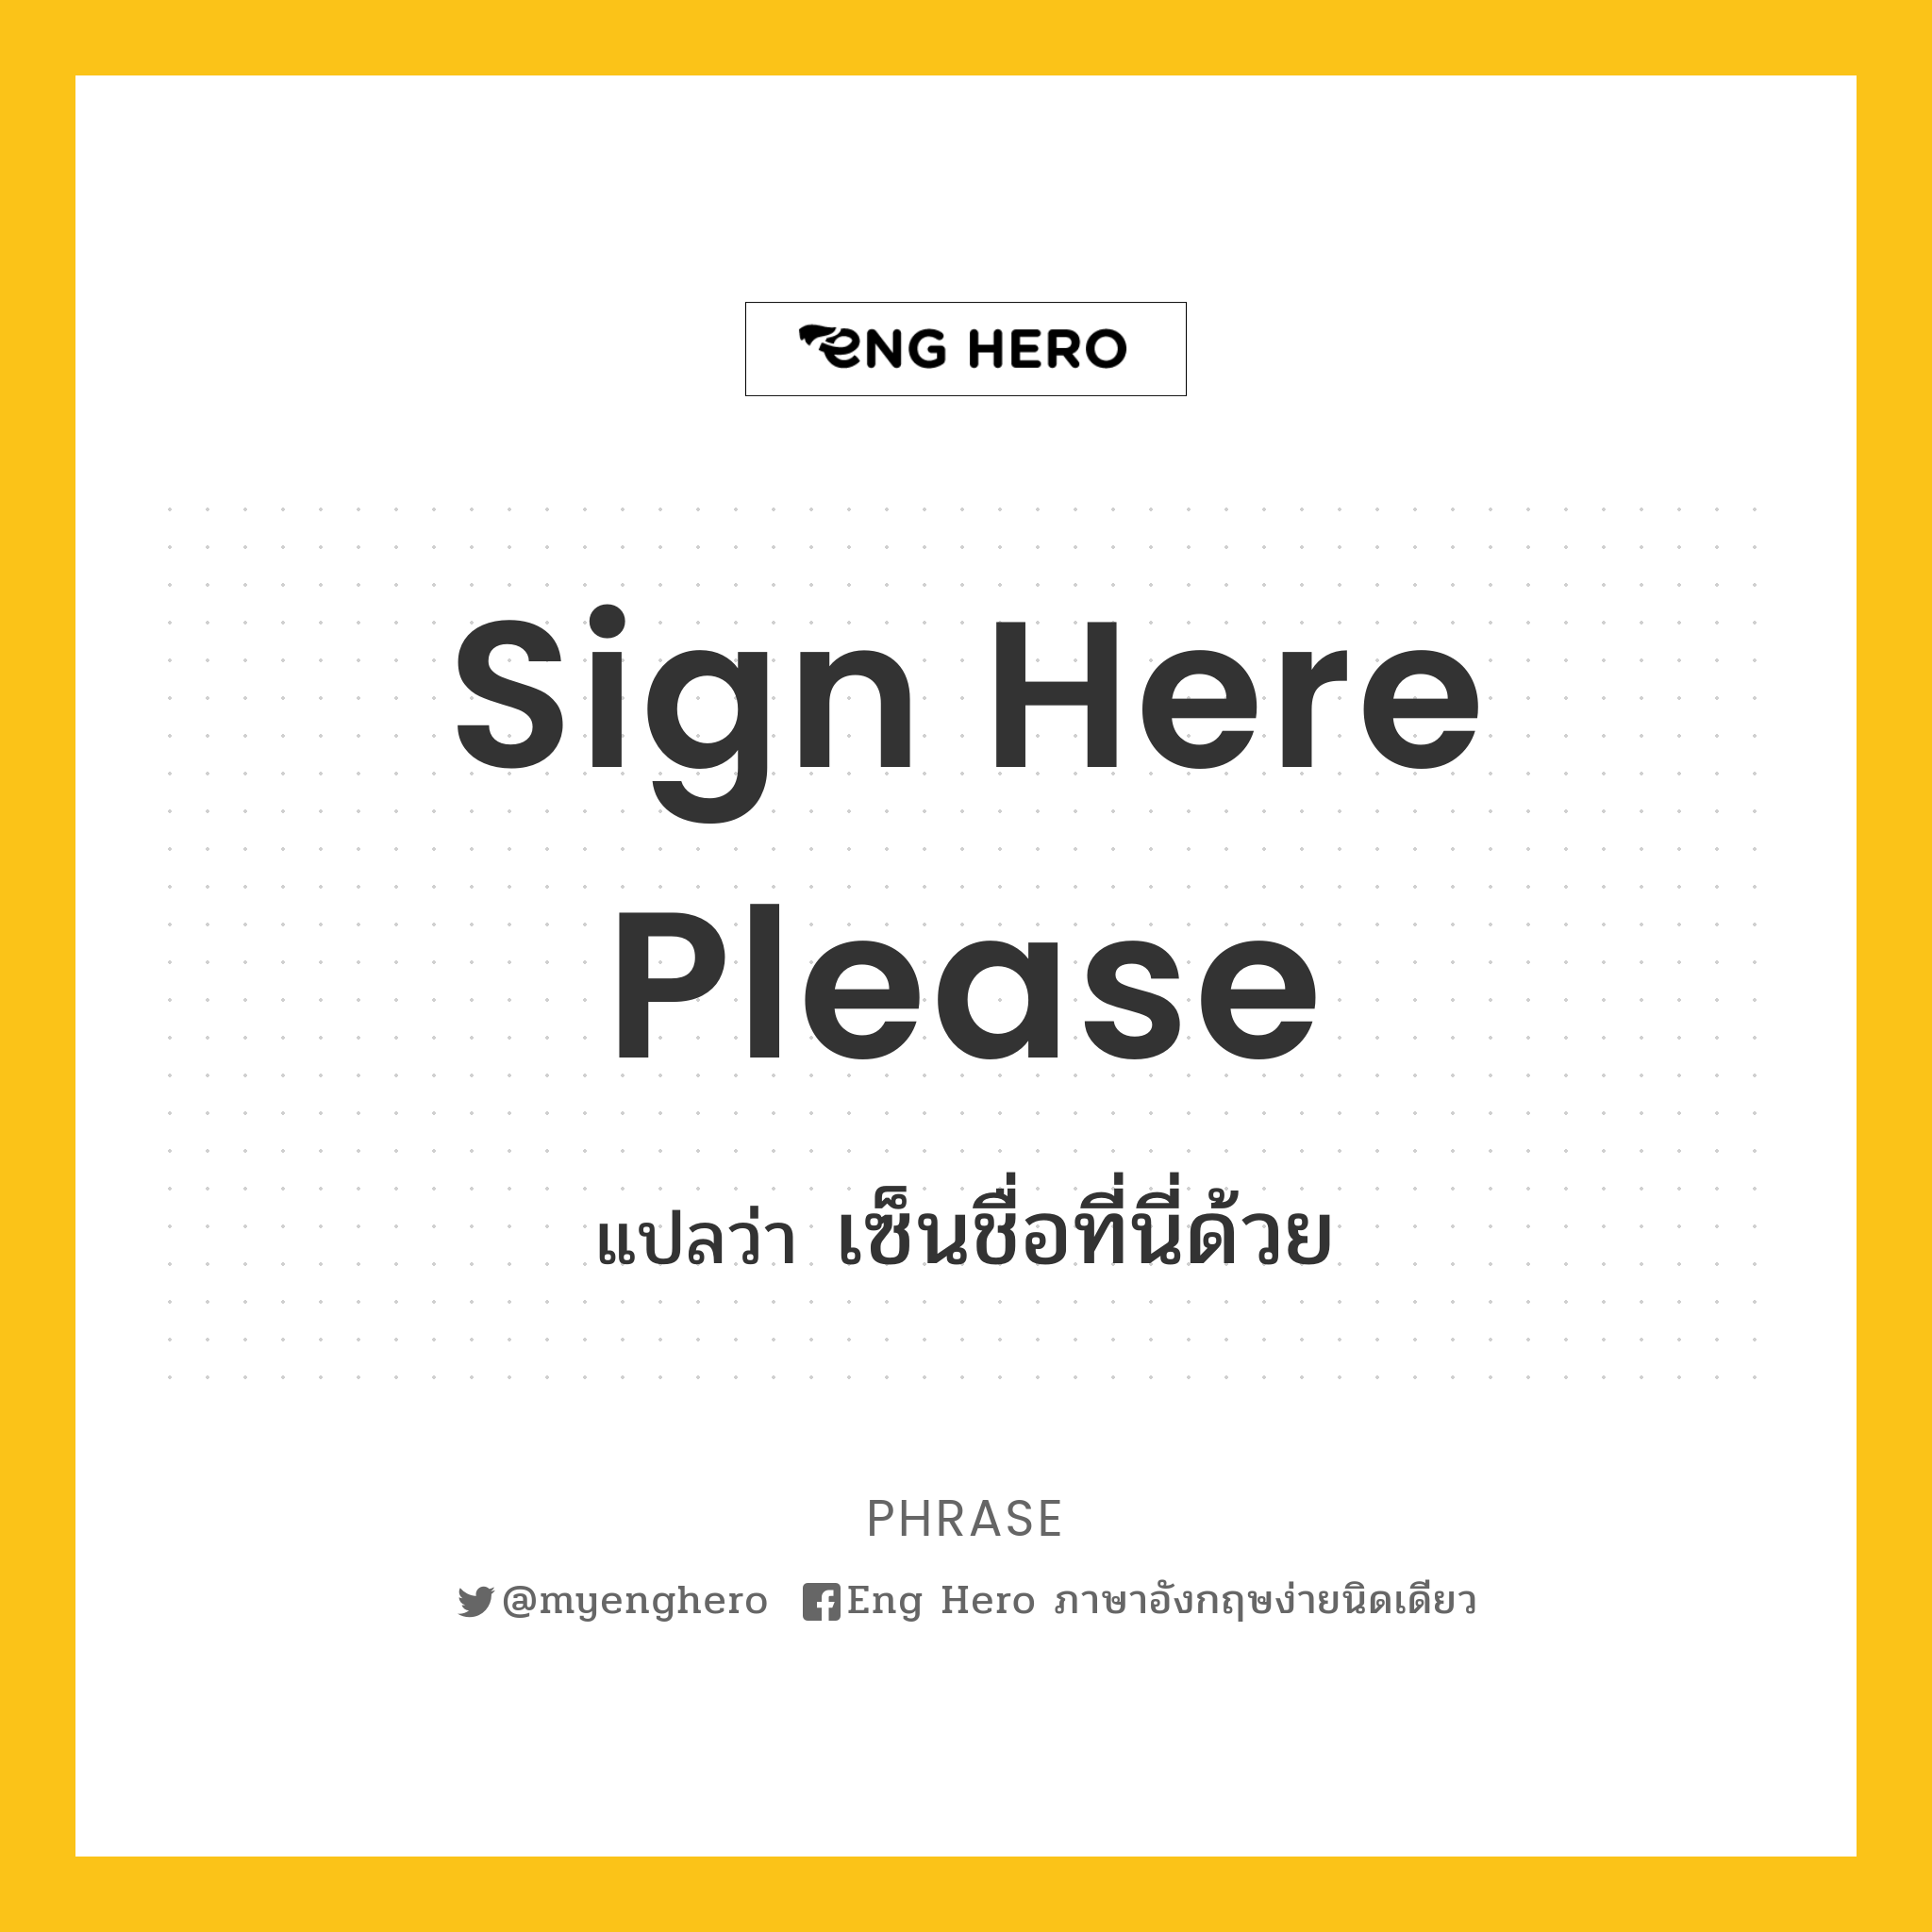 Sign here please